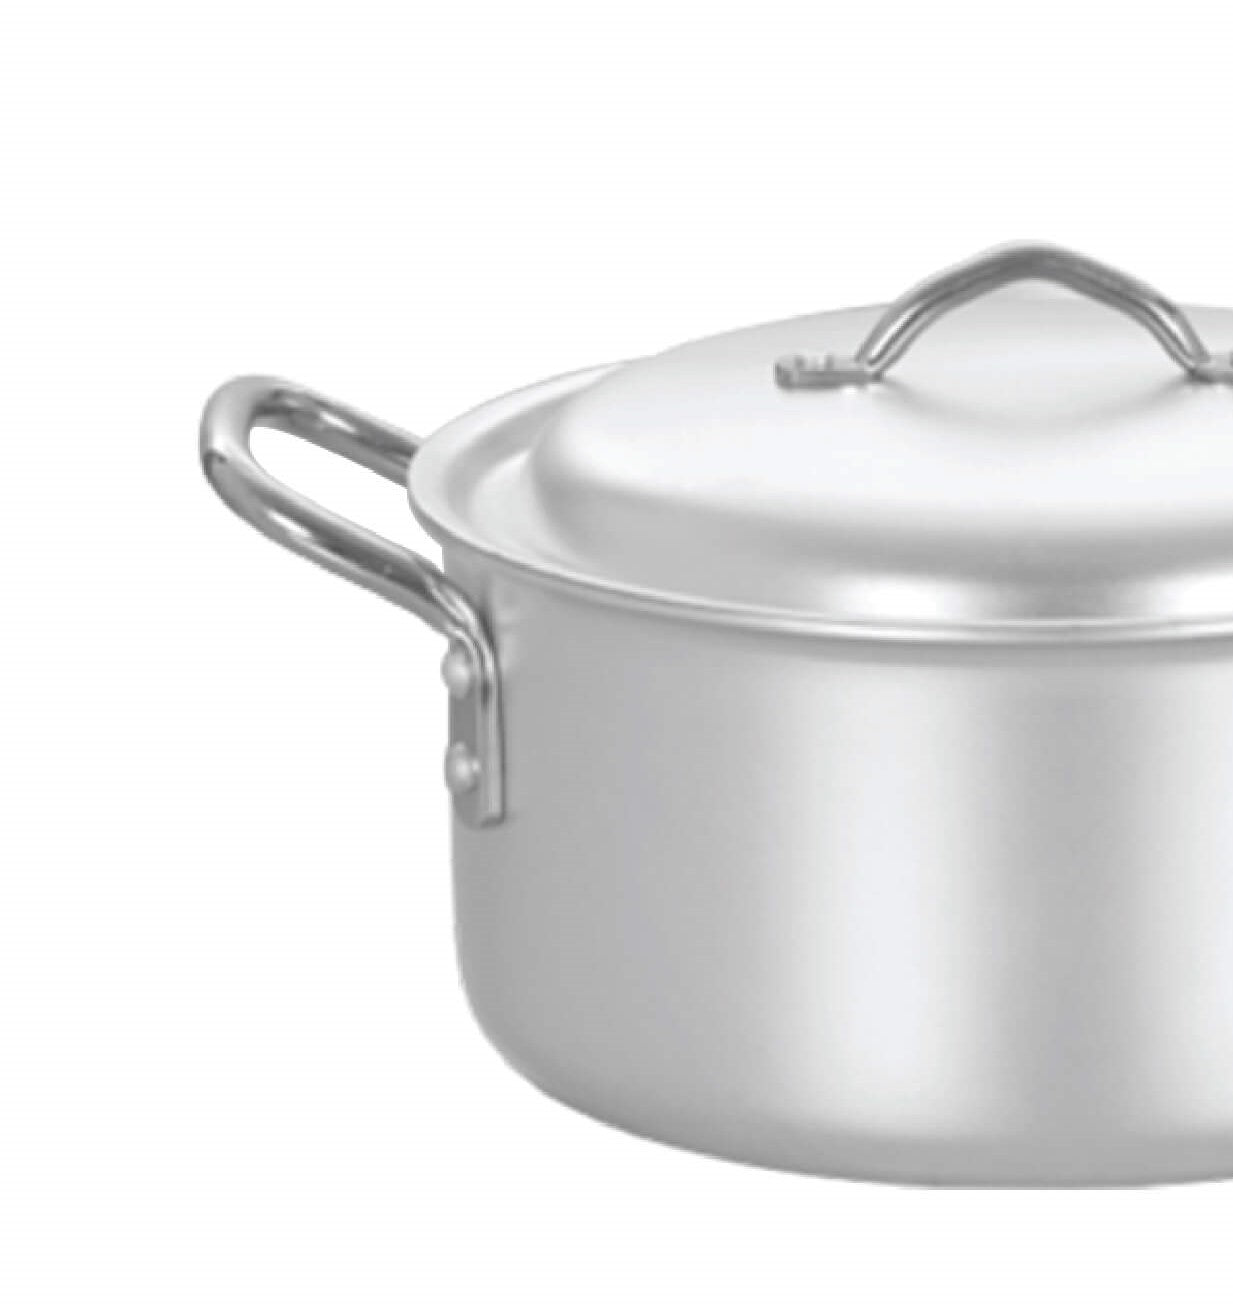 Best Metal Finish Cooking Pan / Casserole 28 cm Aluminum Alloy Metal - best price in pakistan from best cookware brand - majestic chef cookware